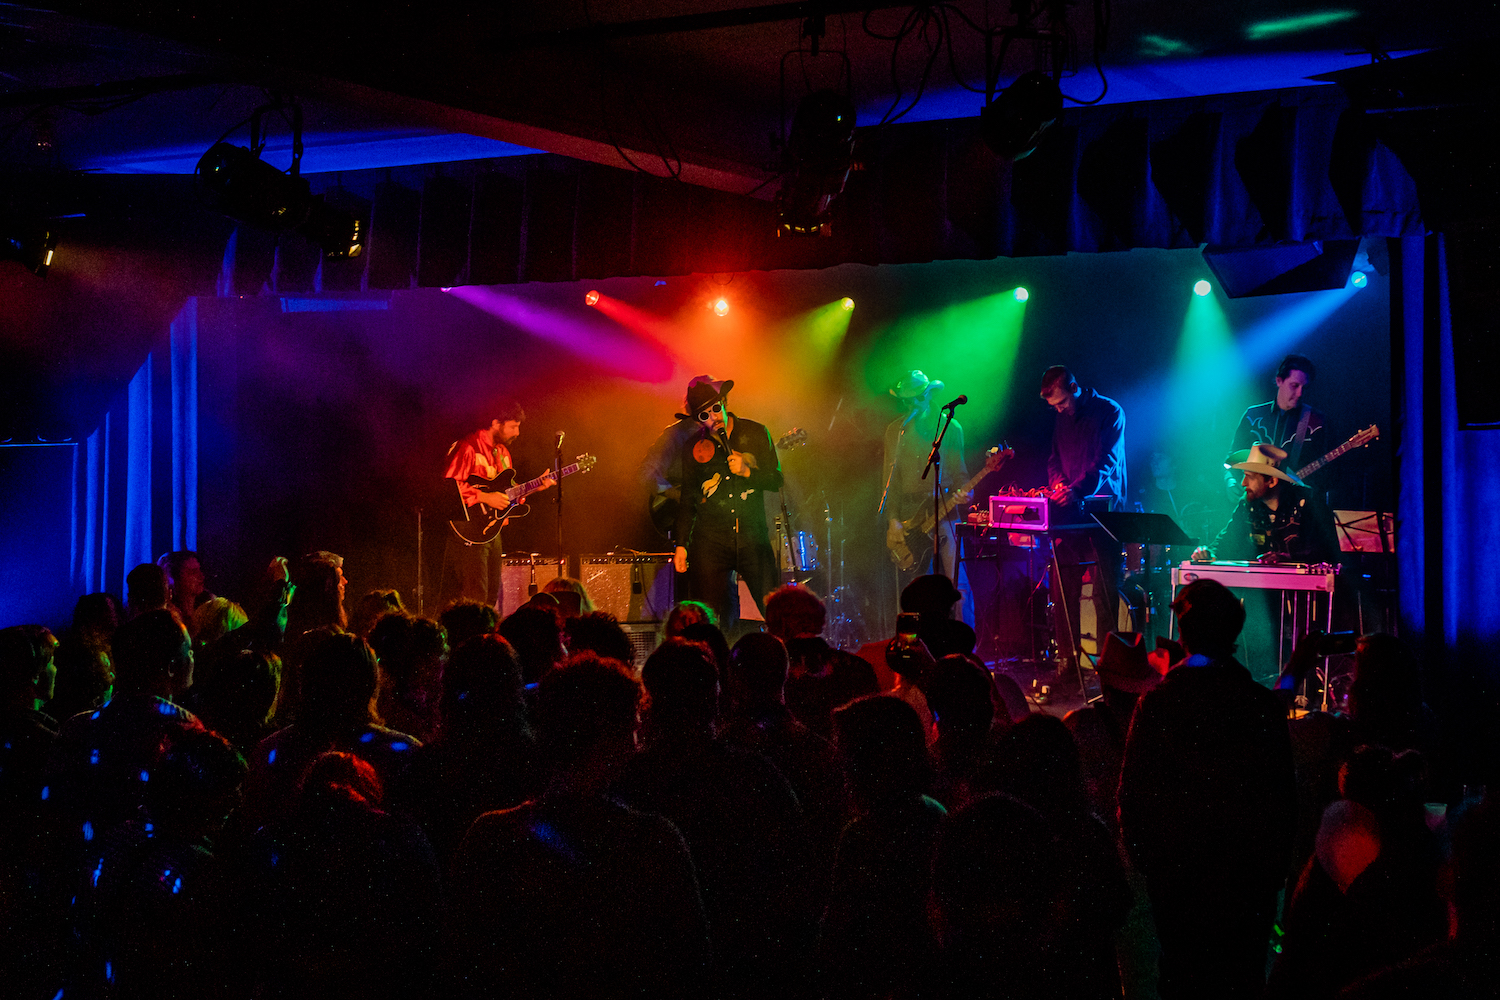 Band members on a stage performing dressed as cowboys with mutlti-colored strobe lights 